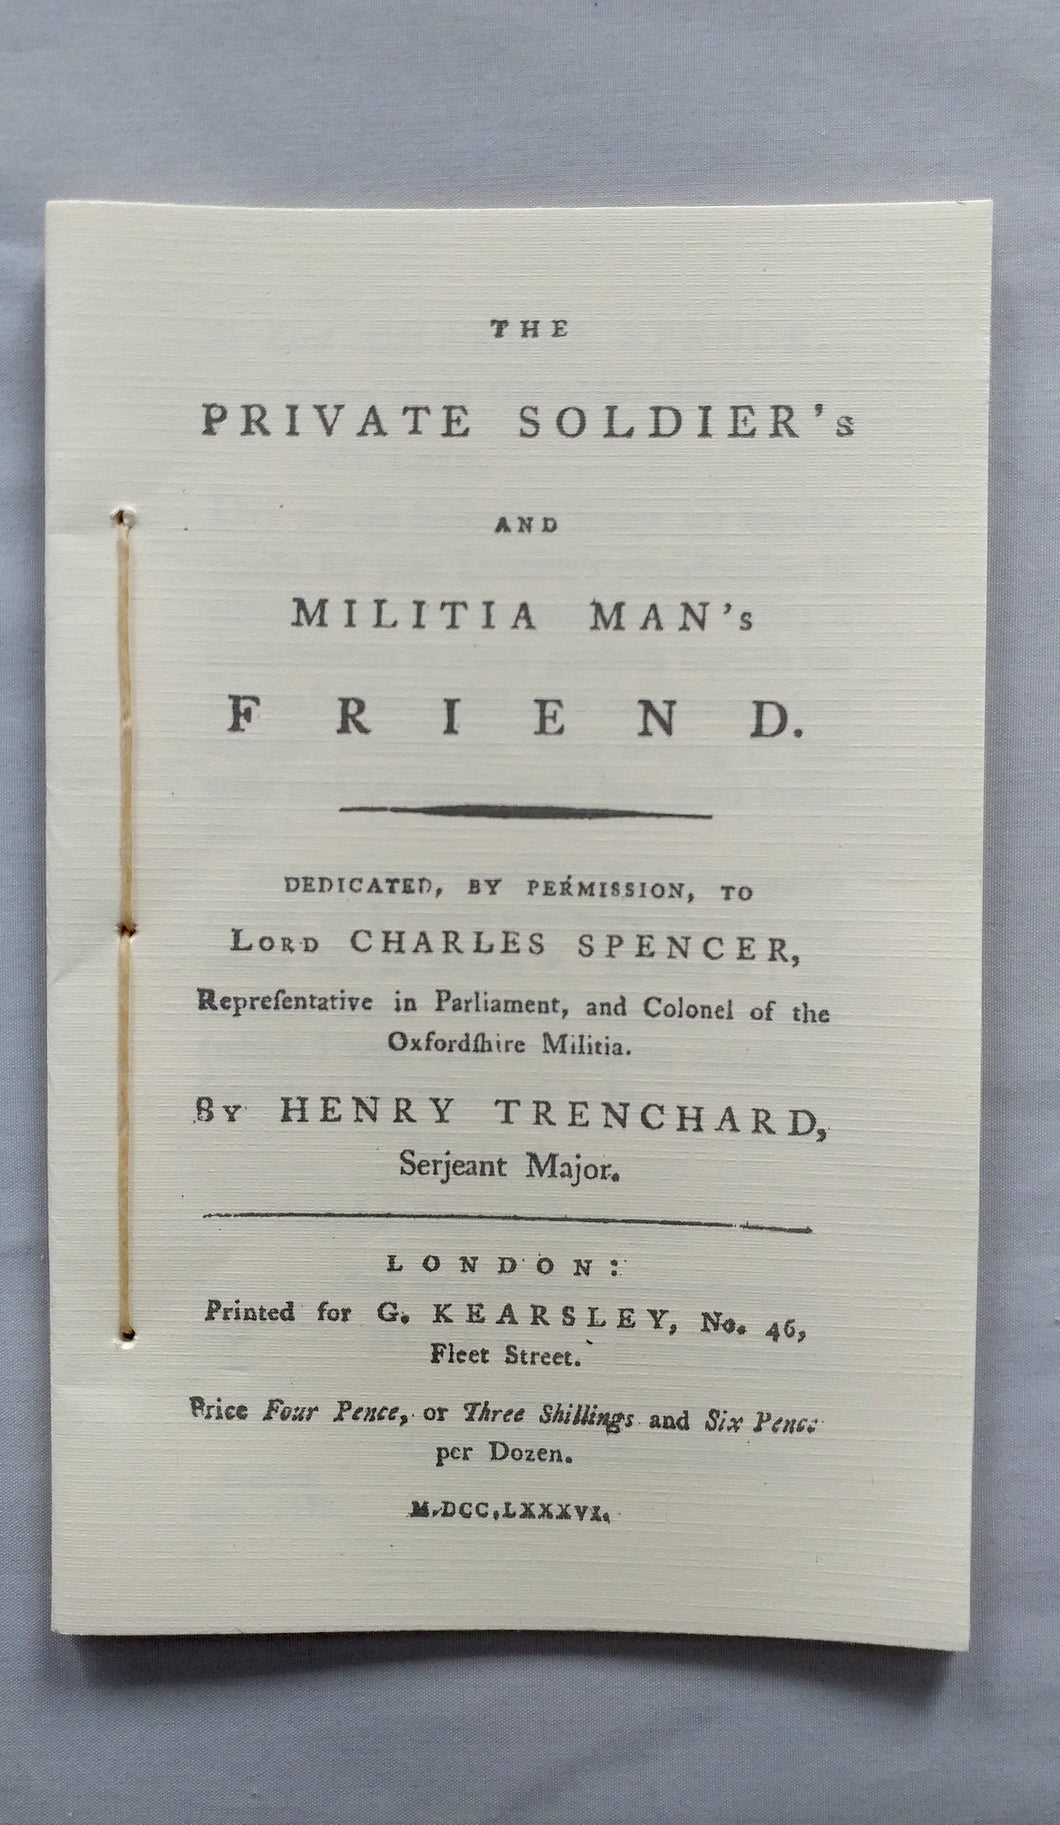 The Private Soldier's and Militia Man's Friend